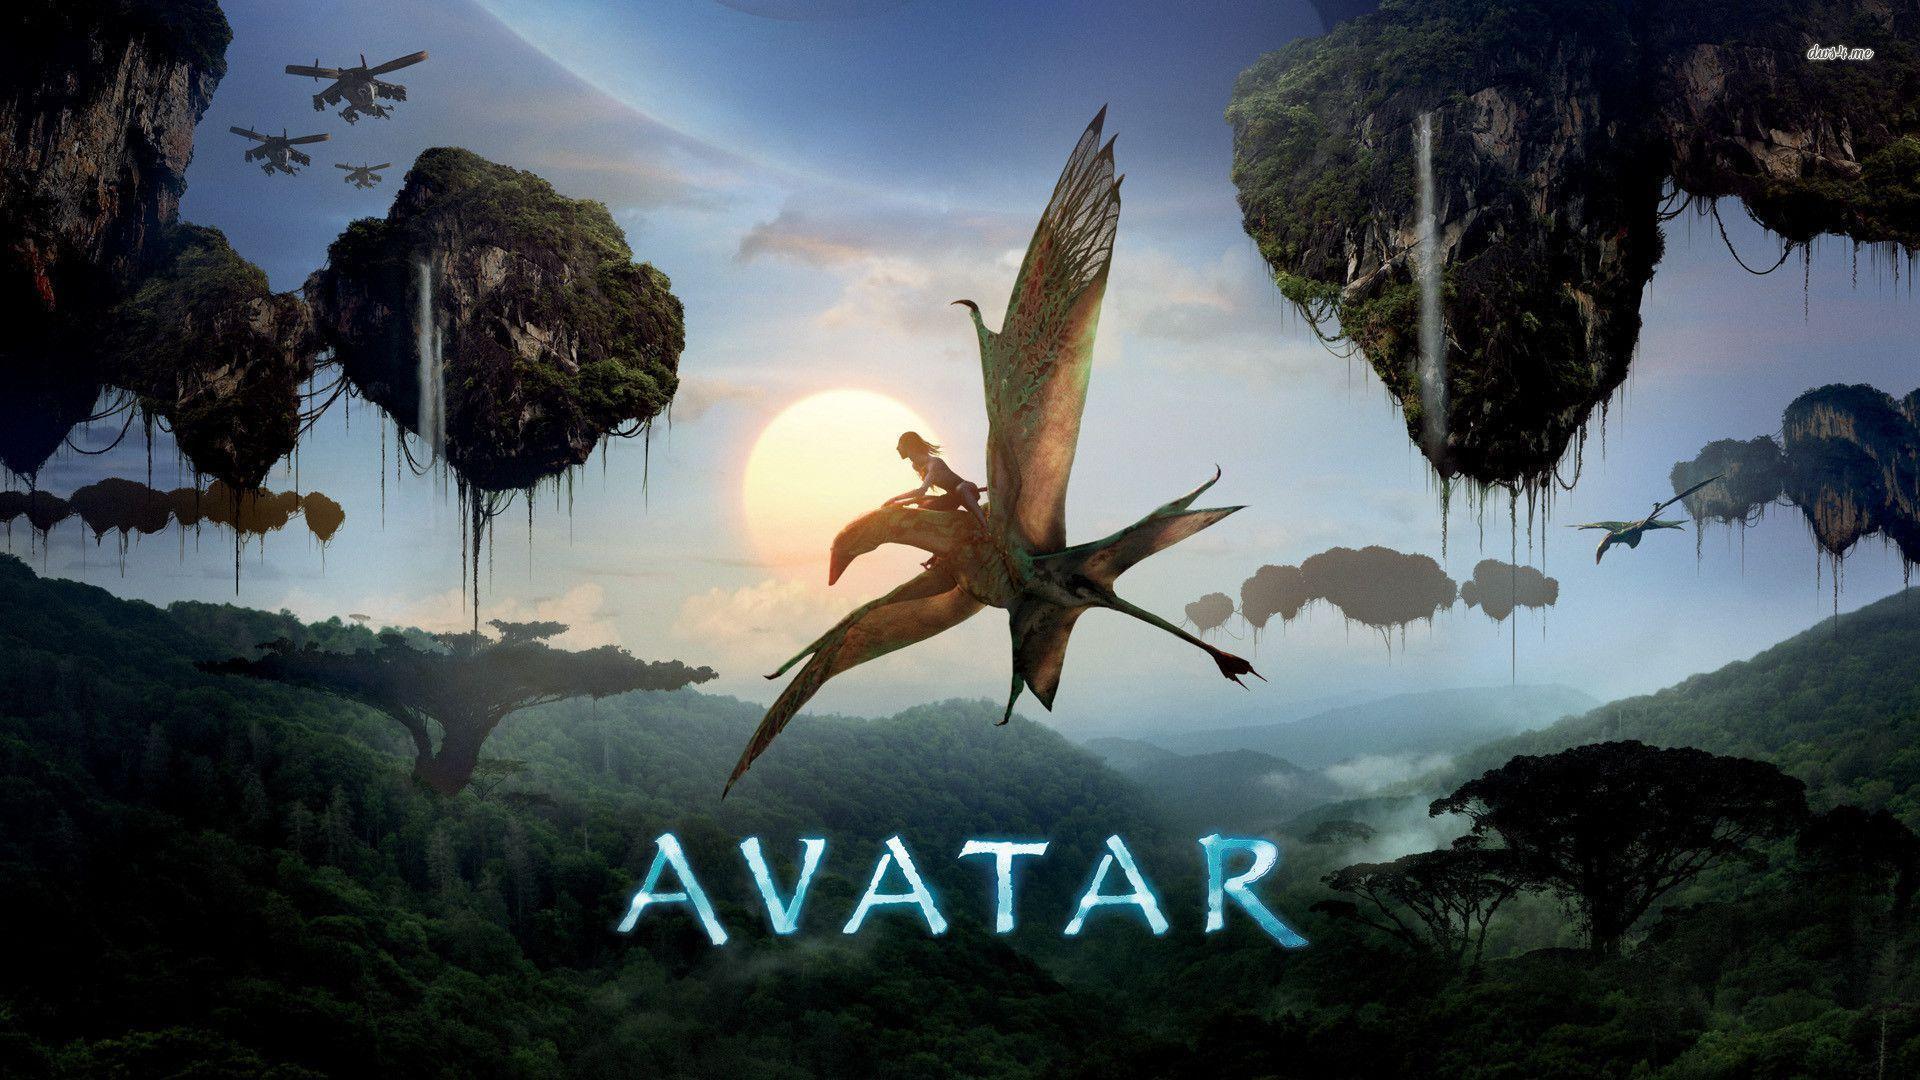 Movie Avatar 3 & 4 from the creator of Titanic and Avatar itself